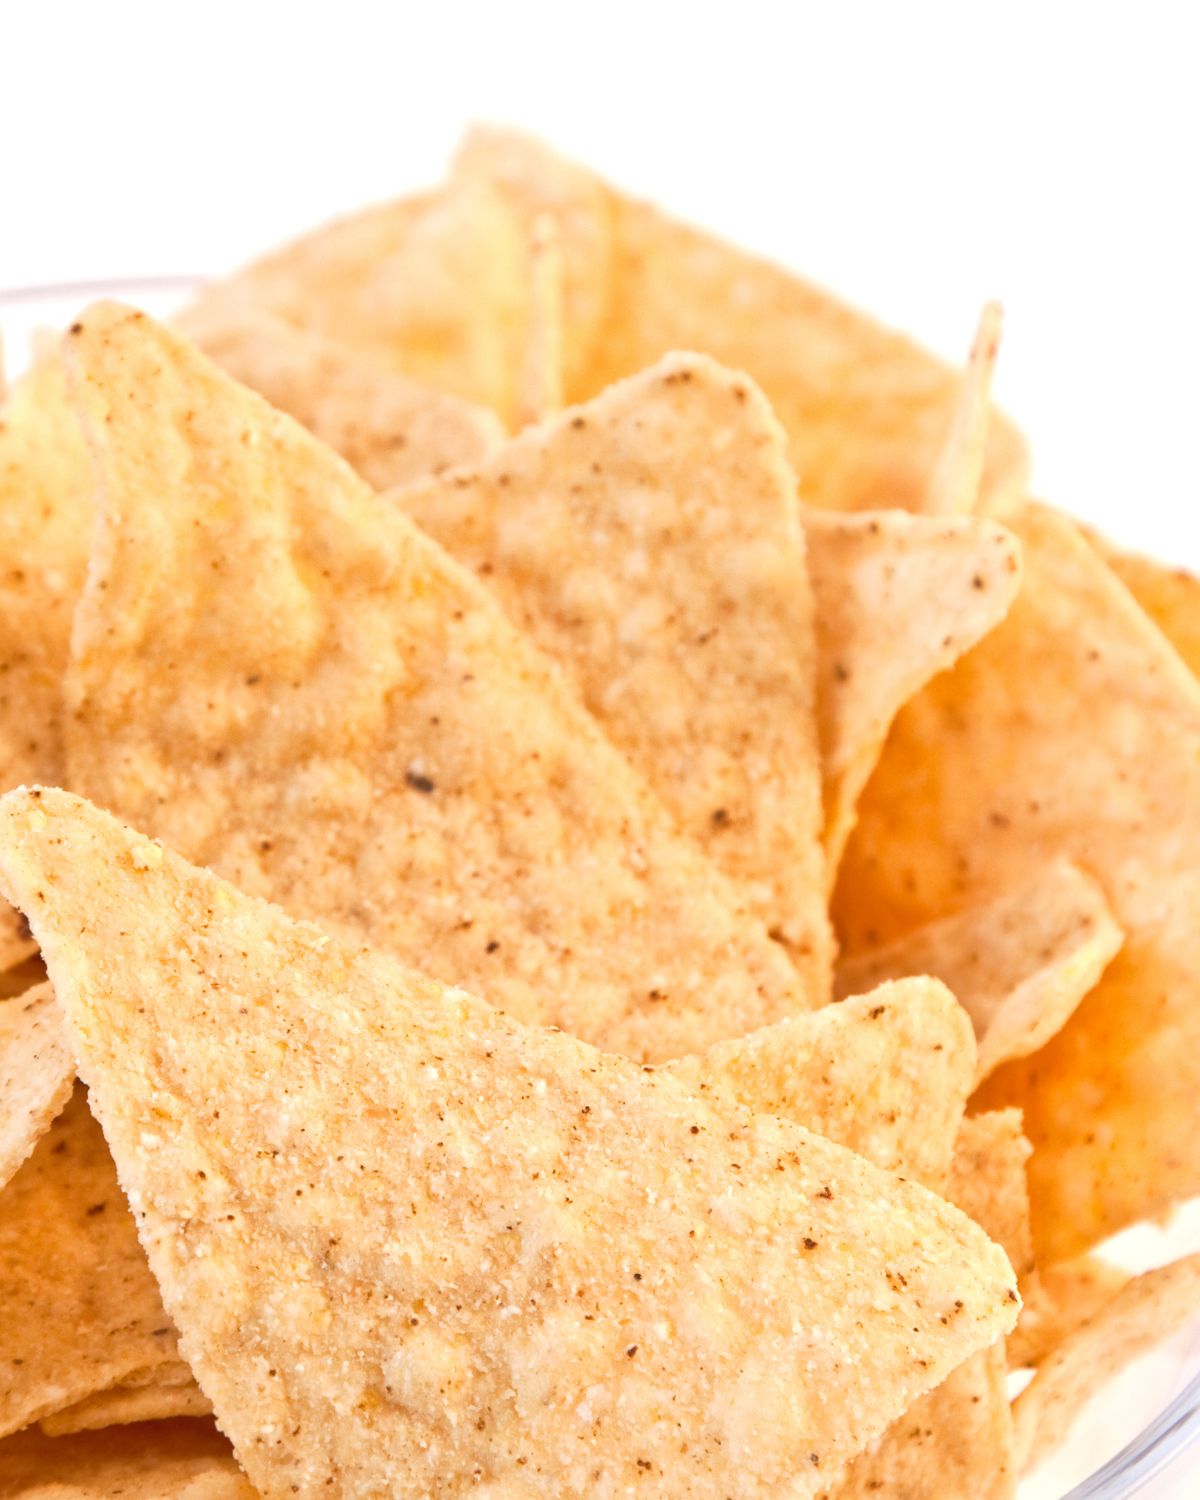 Baked healthy tortilla chips.